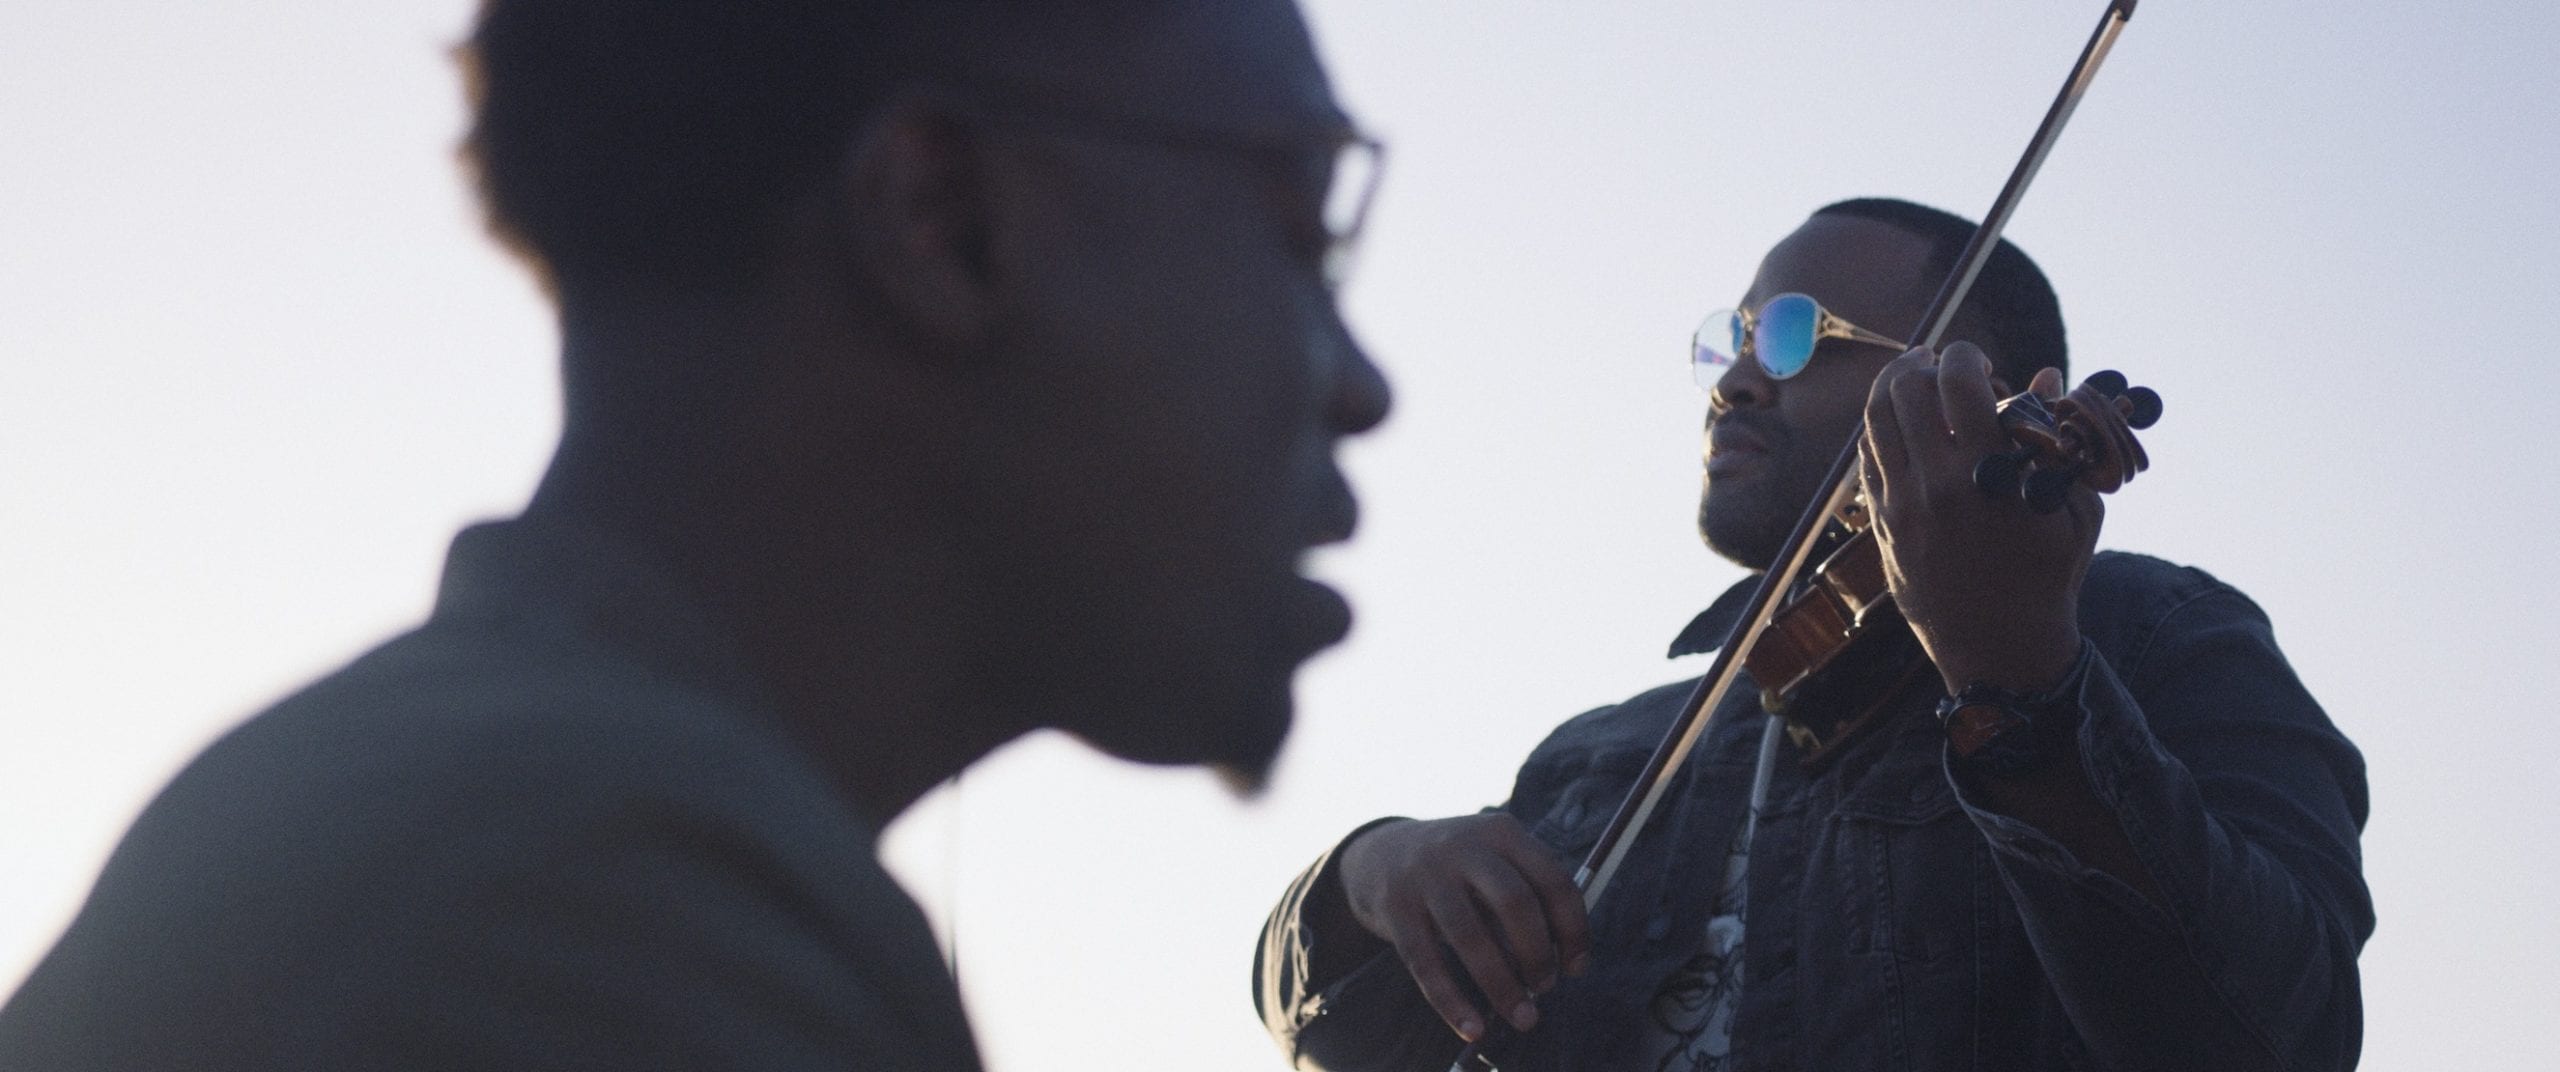 Black Violin One Step Music Video Side profile headshot of a man wearing glasses and another man wearing glasses playing a violin both posing for the camera